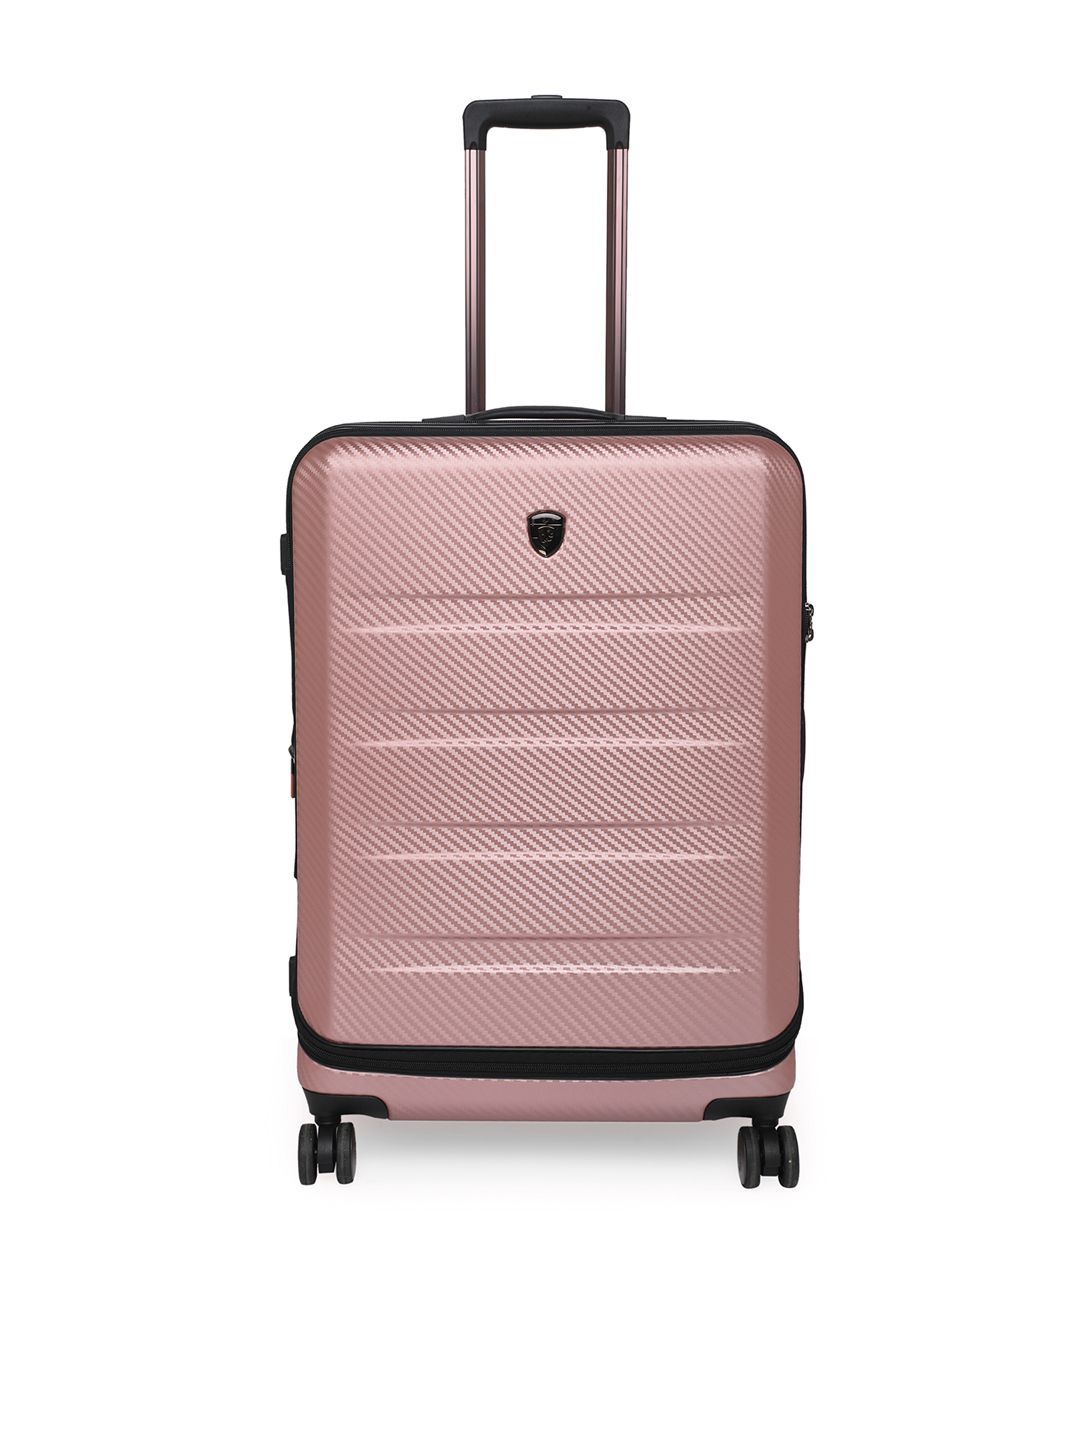 Heys Rose Gold-Toned Textured Hard-Sided Medium Trolley Suitcase Price in India